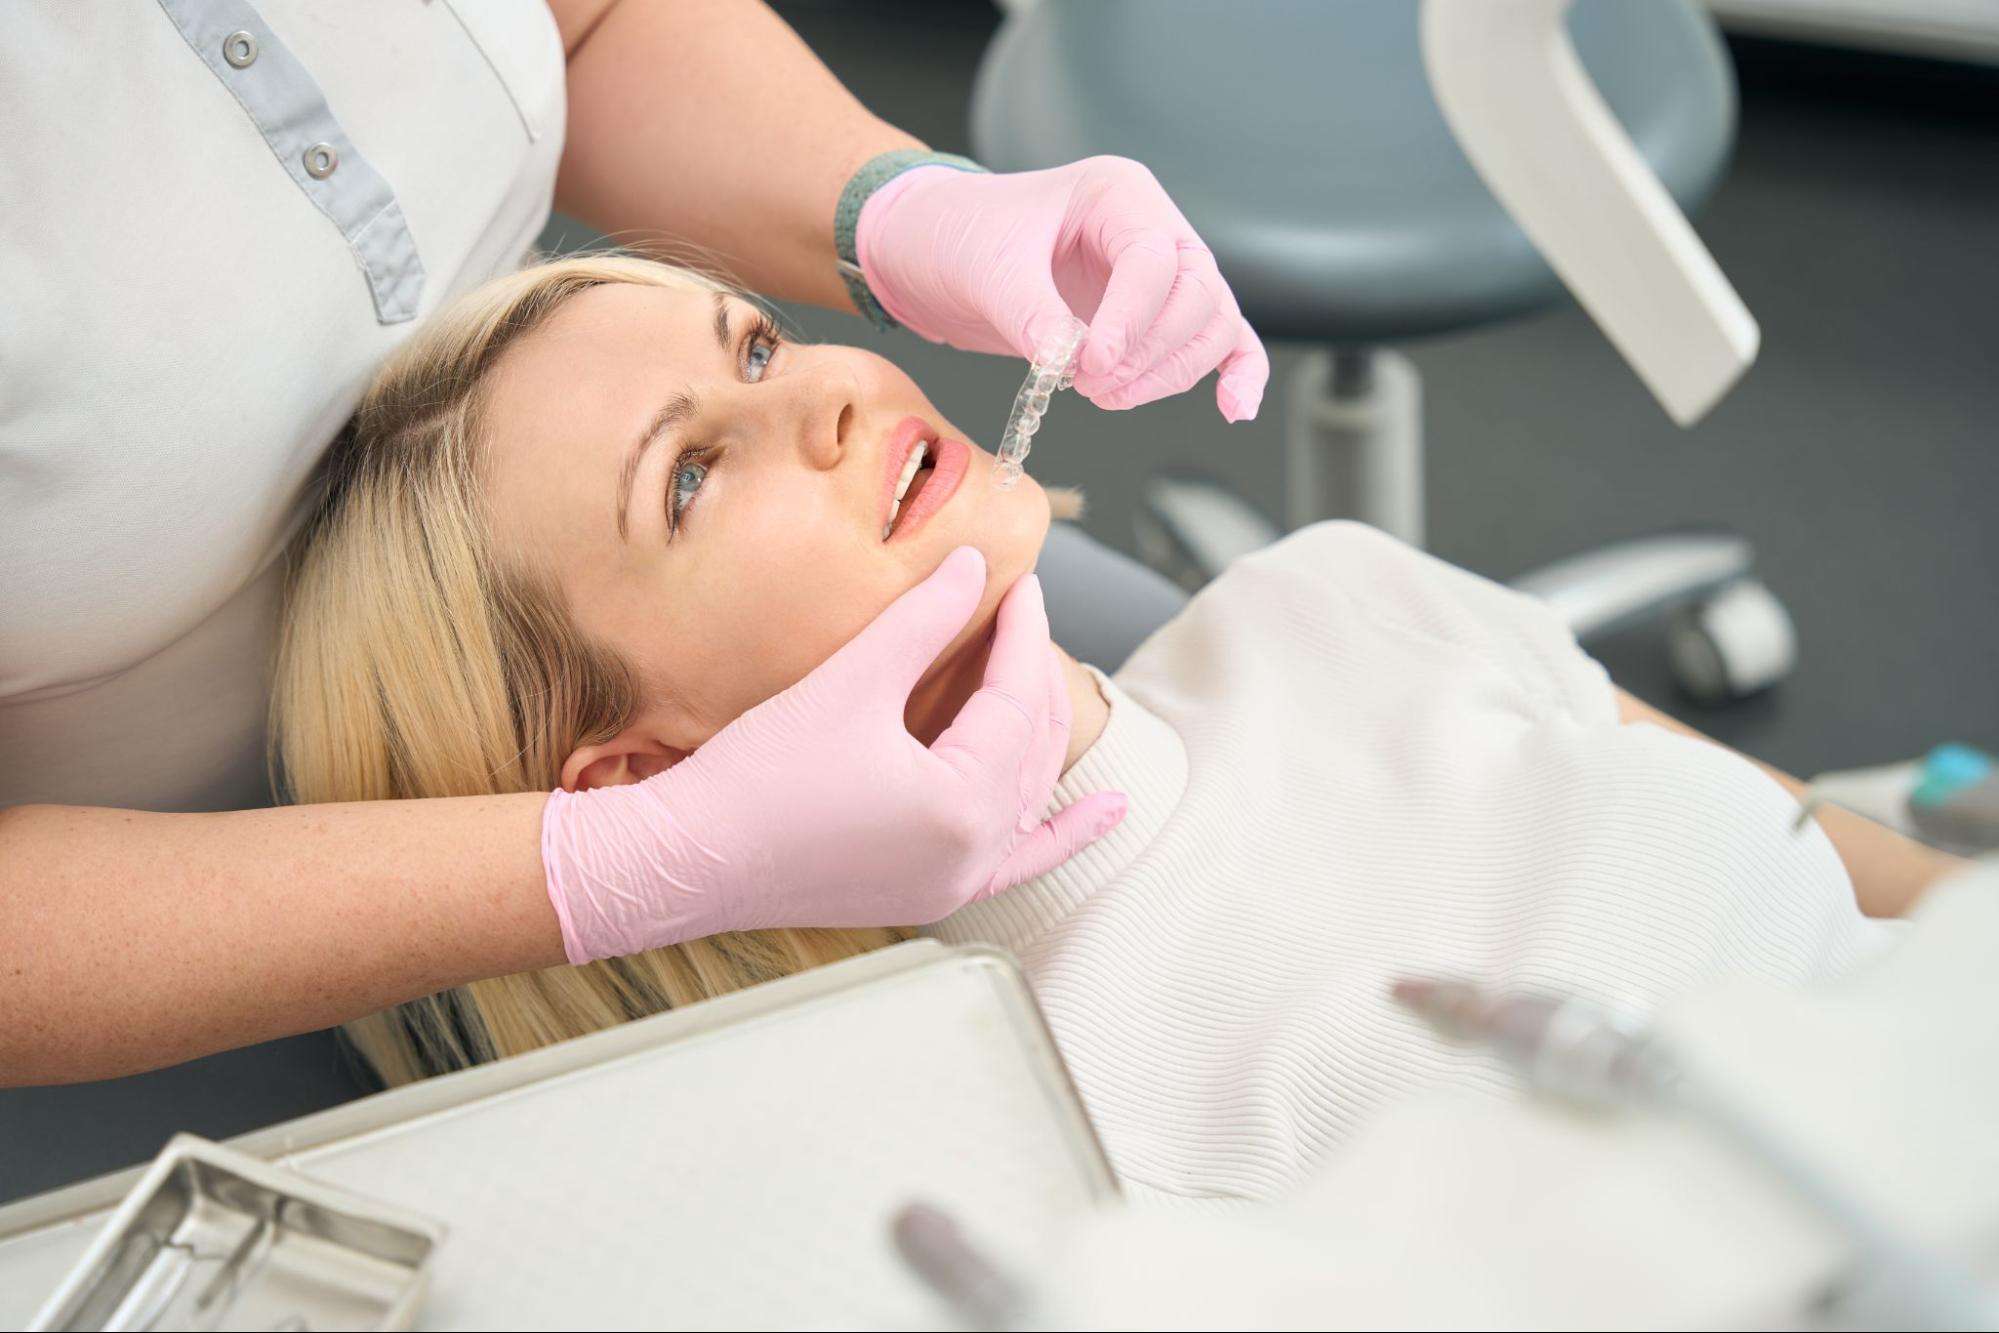 A young woman sits in a dentist’s chair while a staff member brings a clear aligner to her mouth.